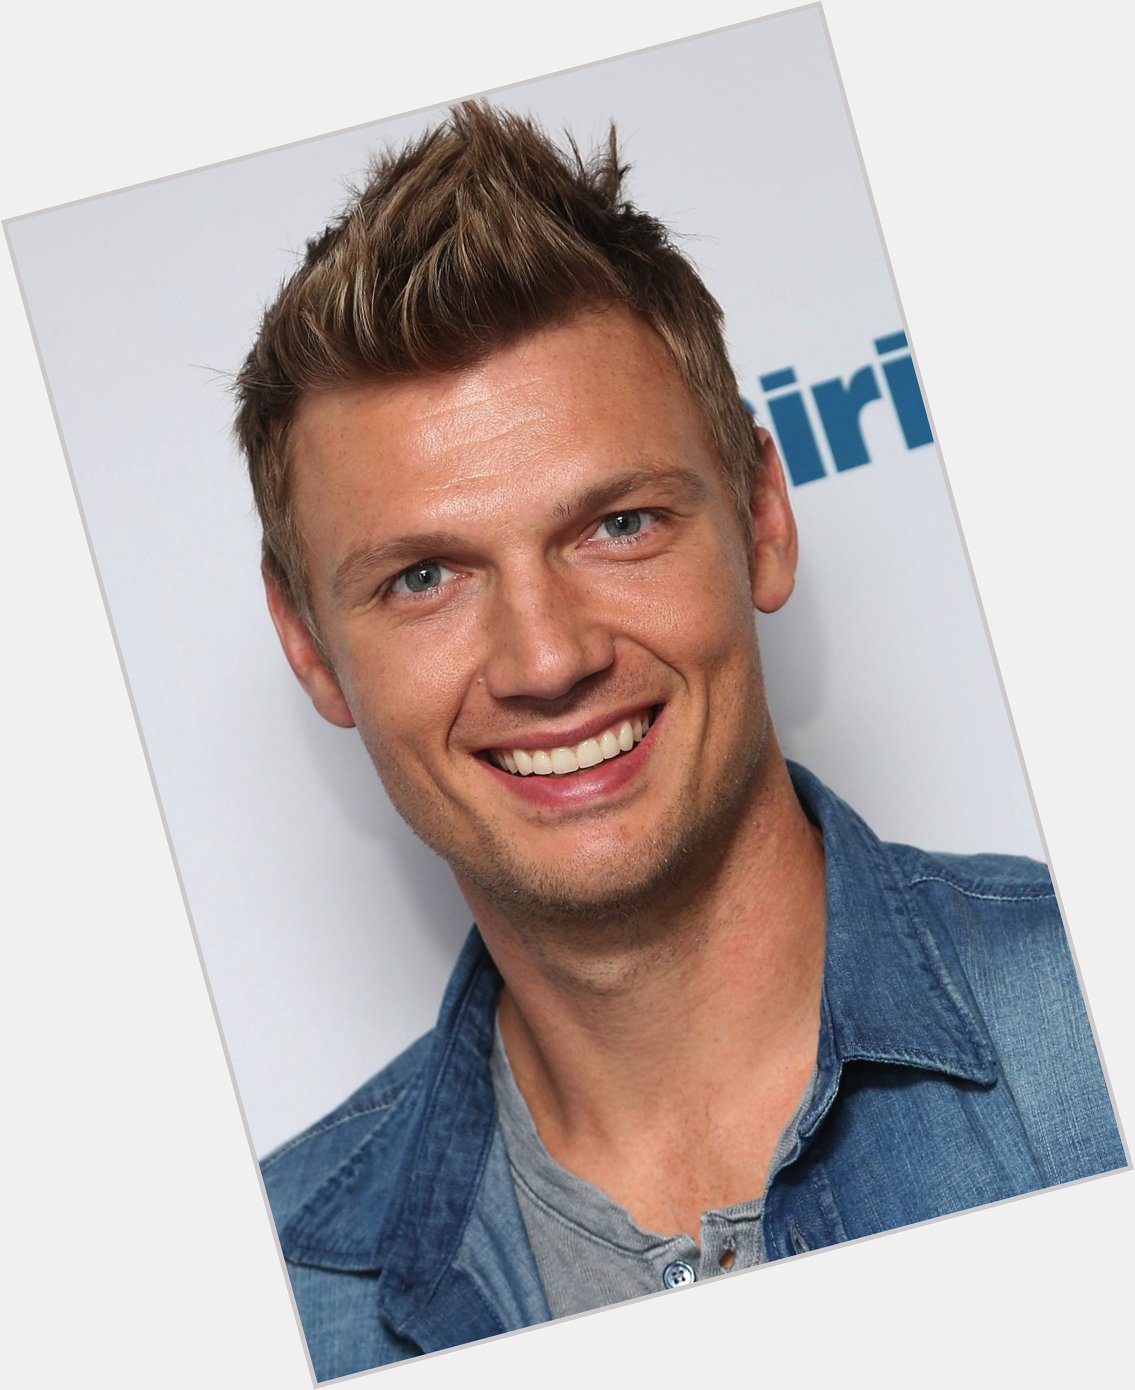 Happy Birthday to Nick Carter
He is an American Singer, Songwriter. 